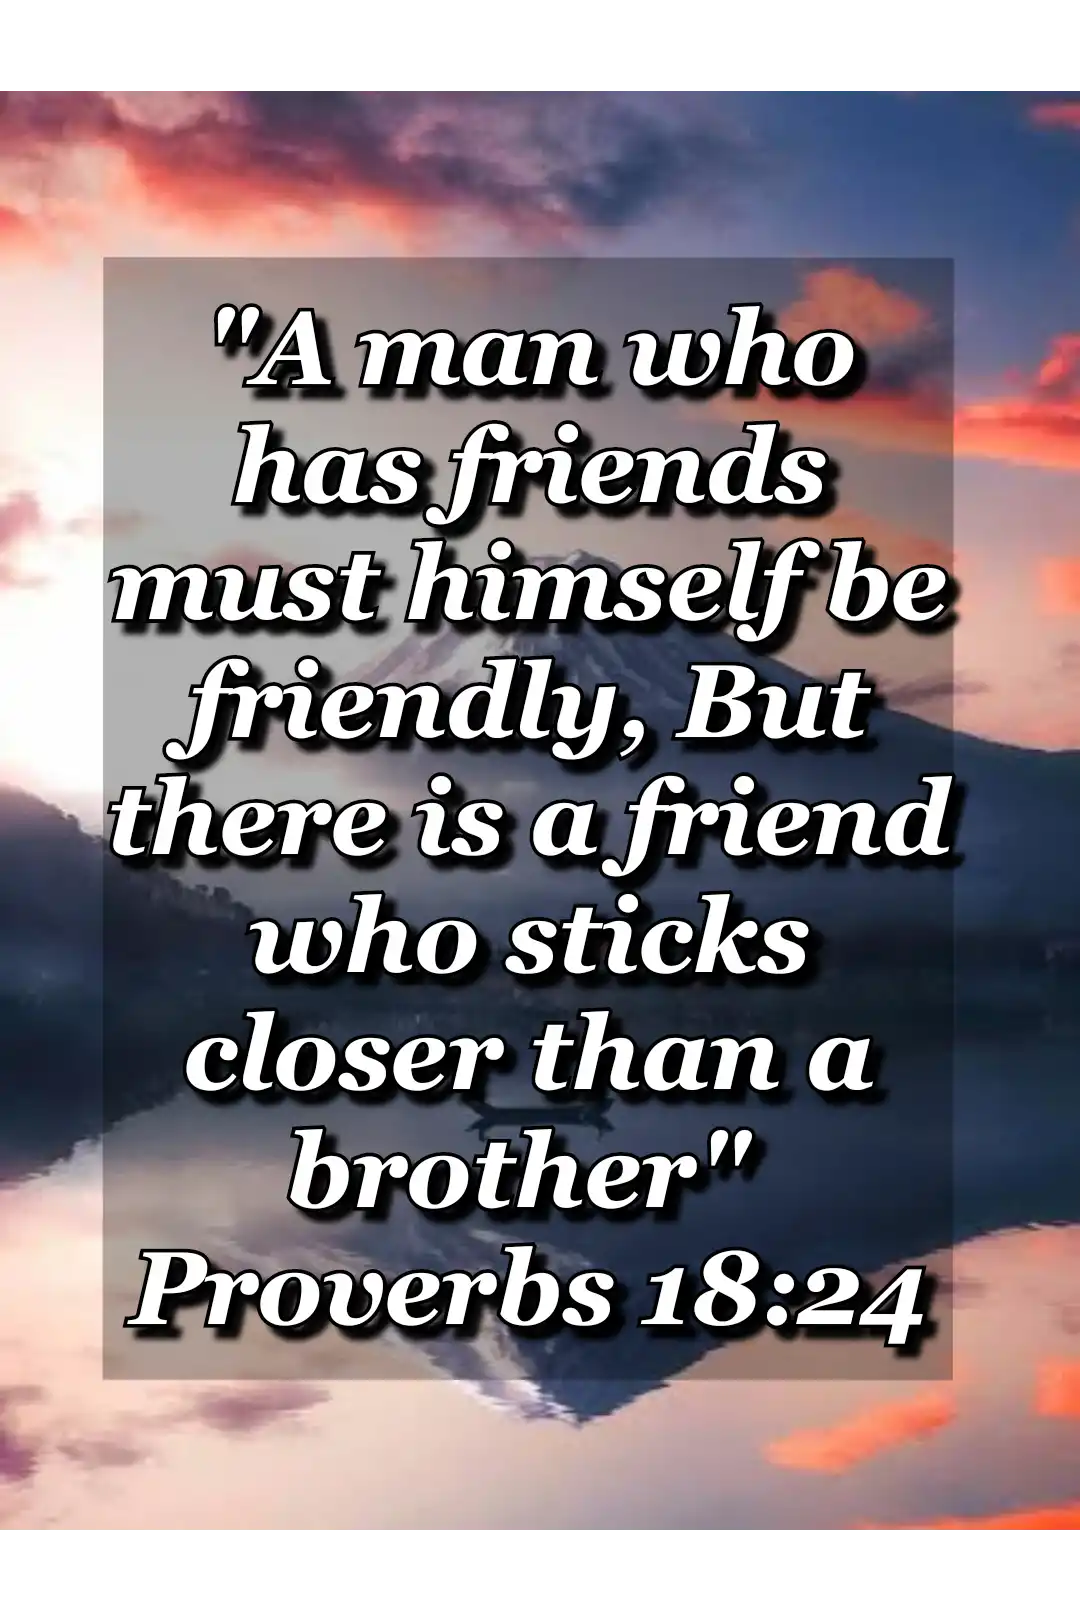 Good Friend Is A Blessing From God (Proverbs 18:24)